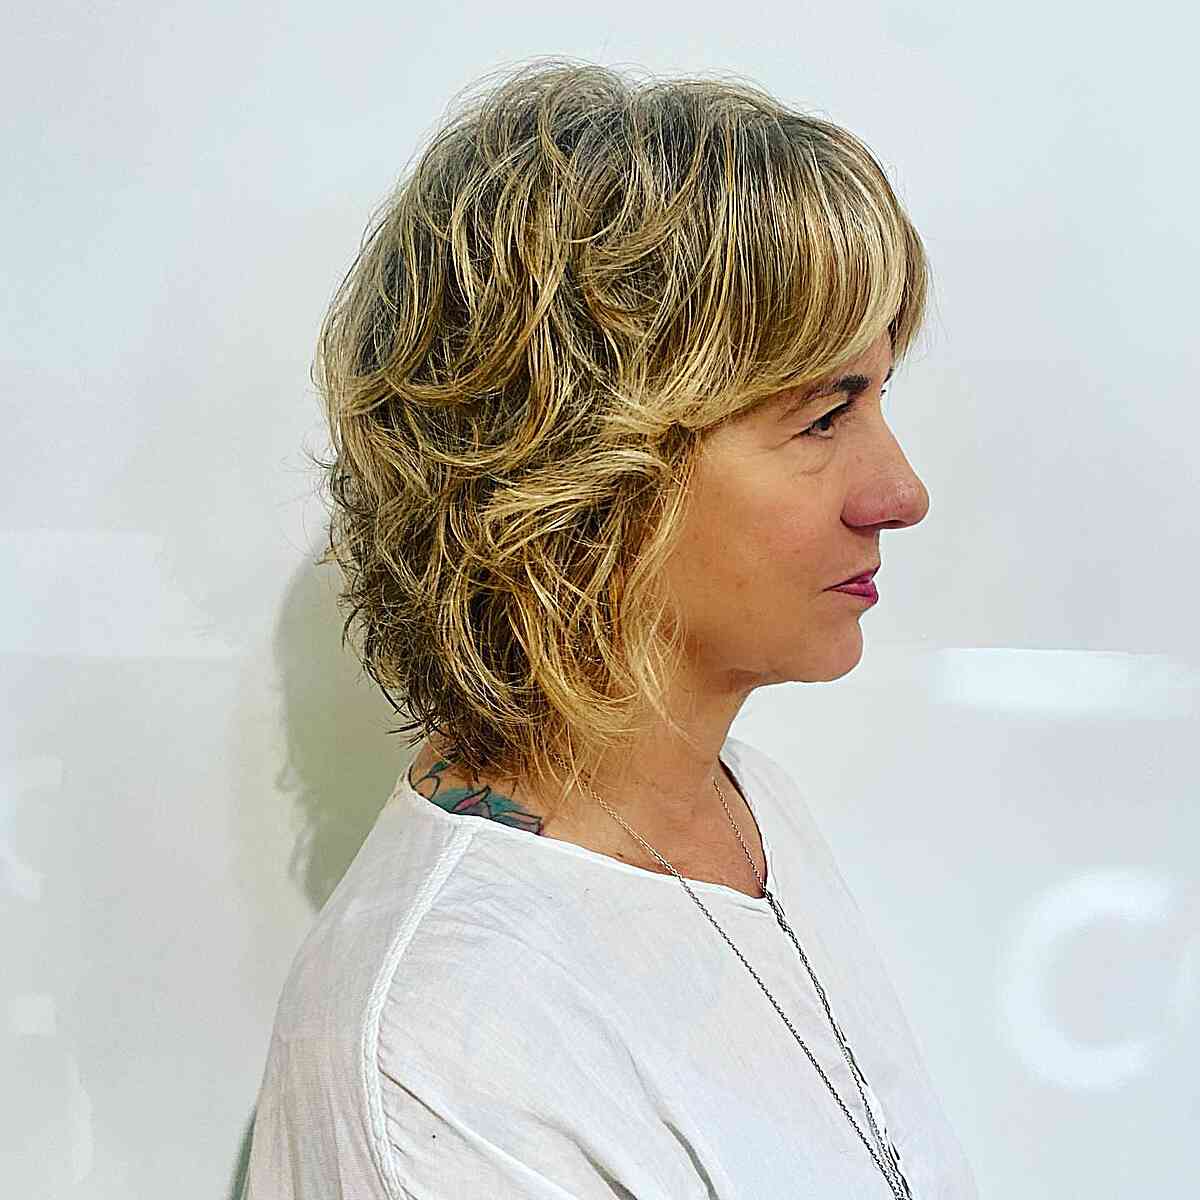 Short Hair with Shaggy Layers and Straight Bangs for Mature Women Over Fifty